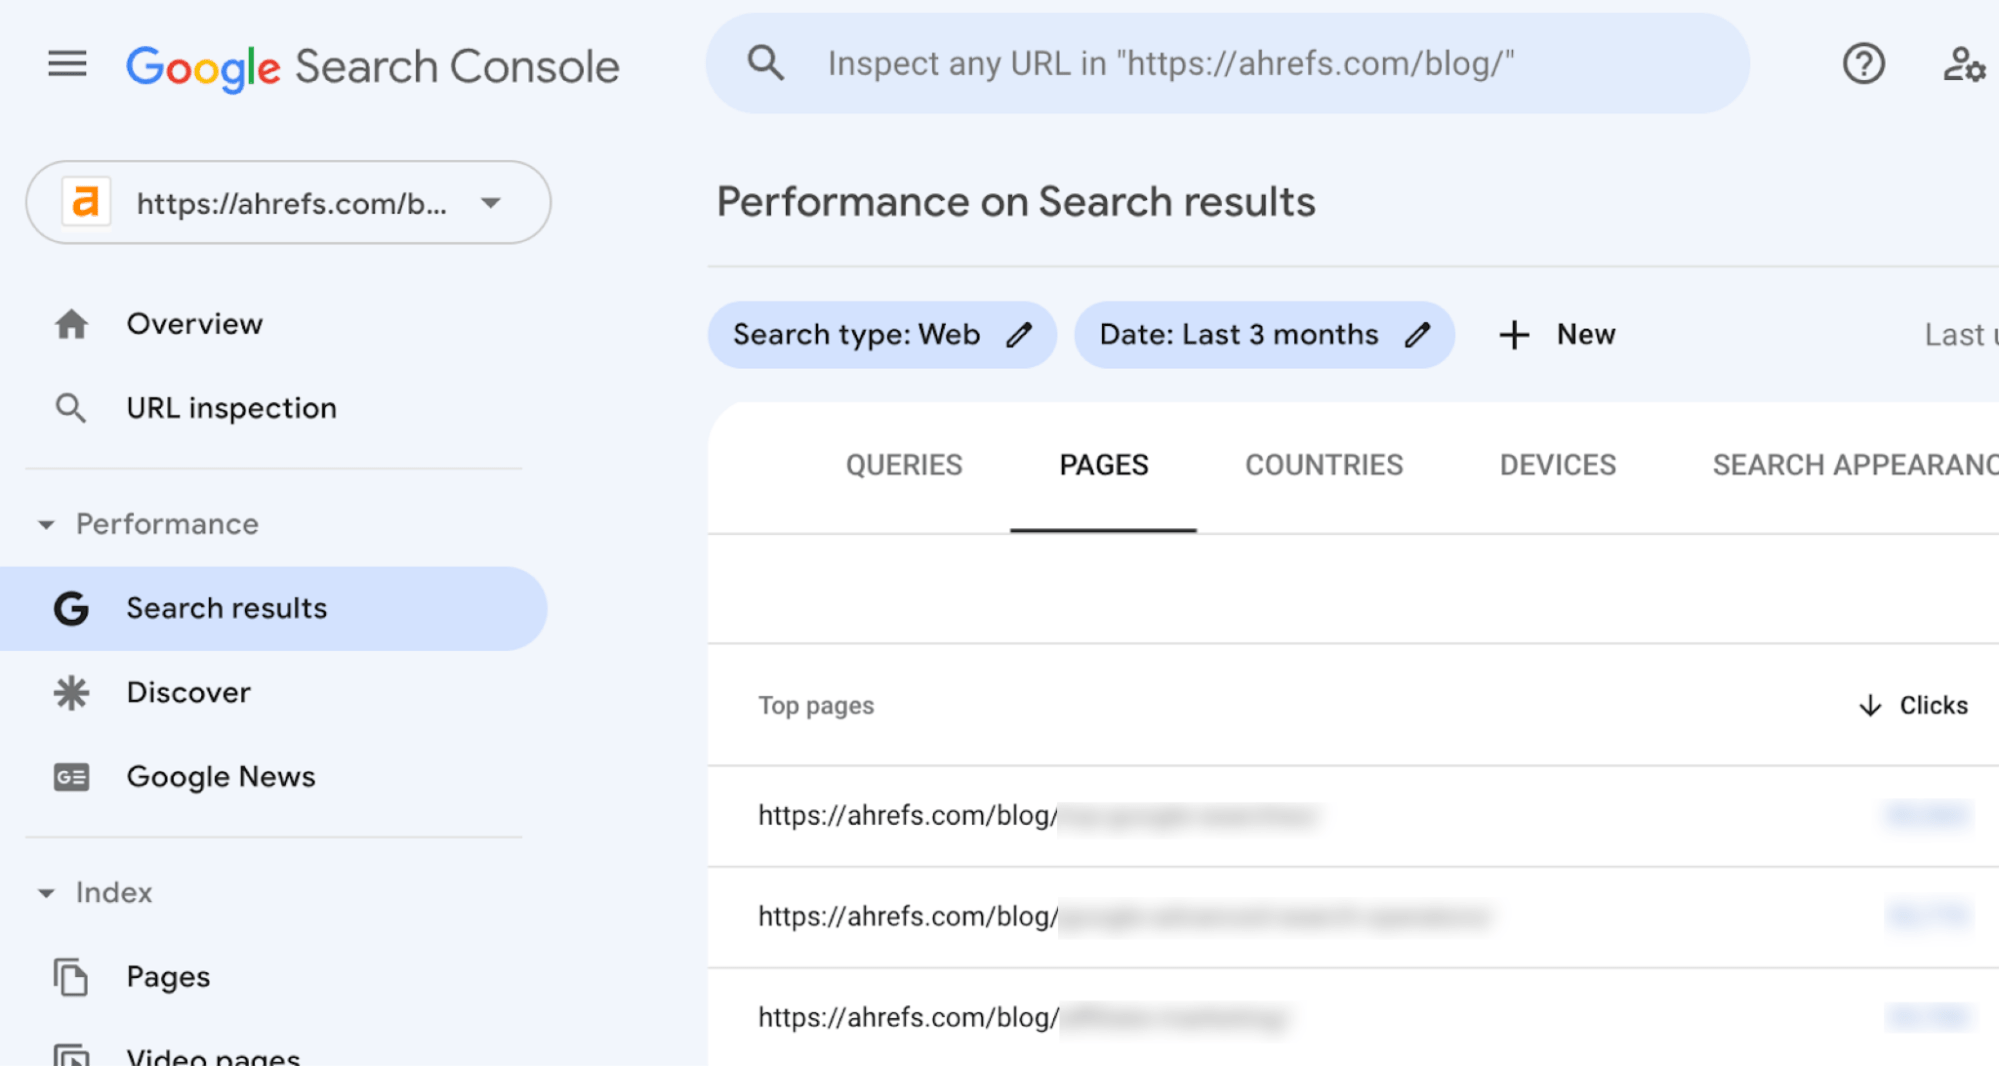 How to find top pages in Google Search Console
